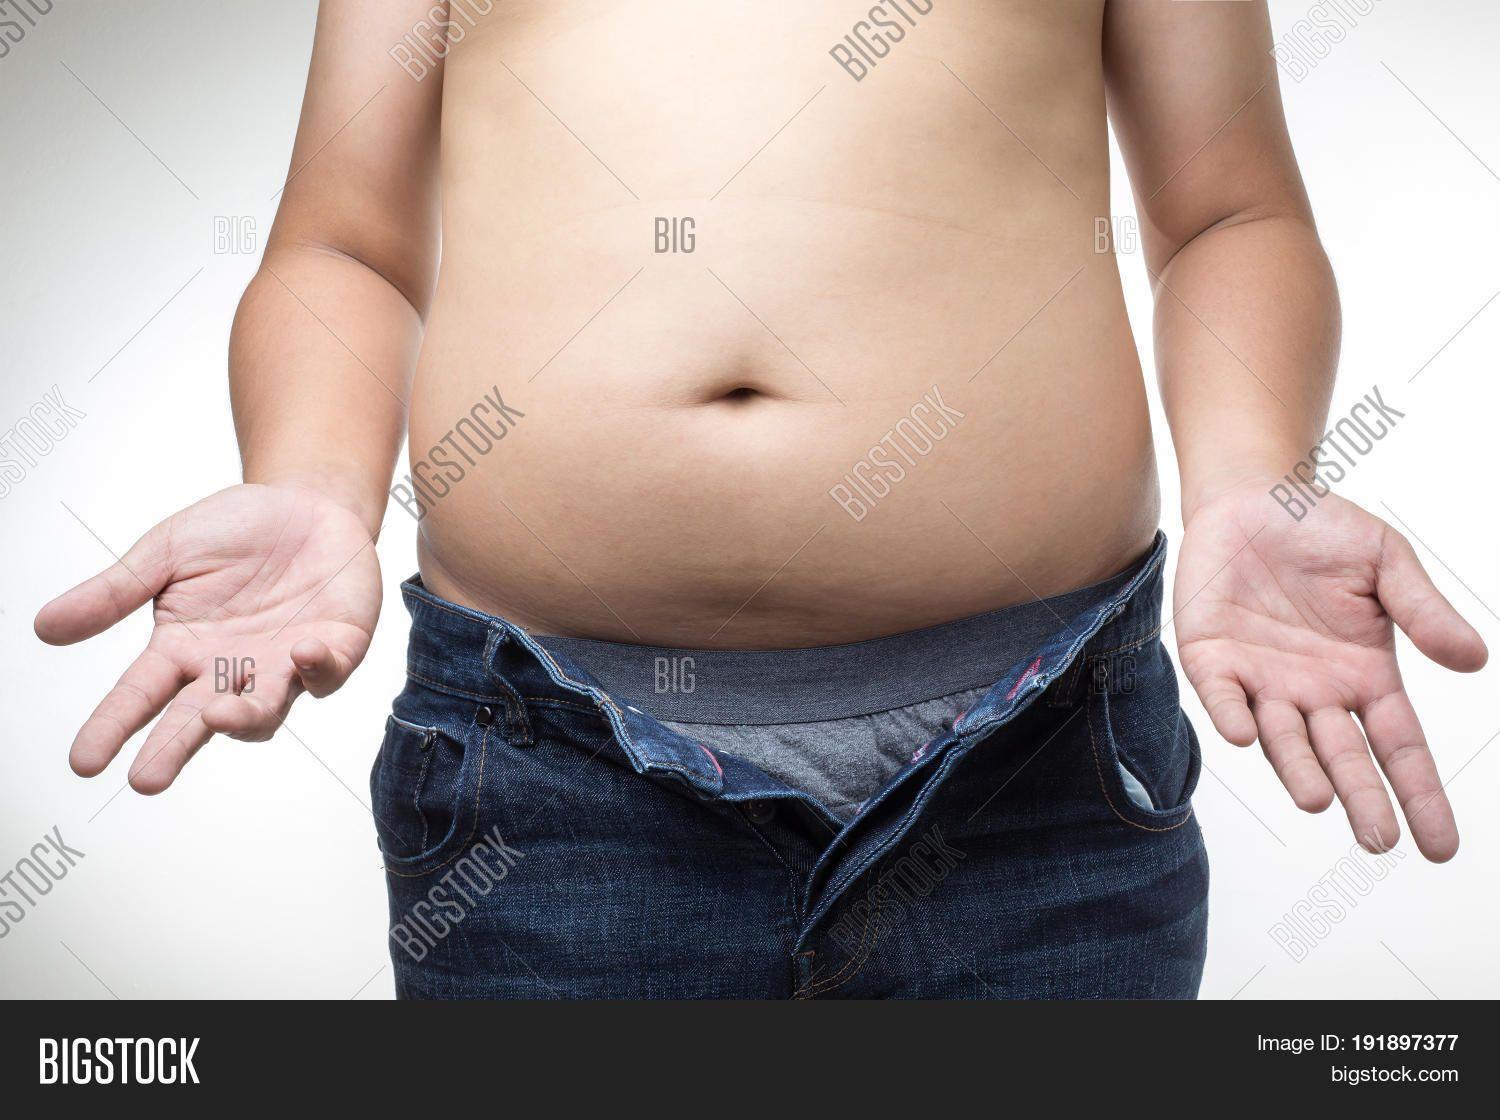 Professor reccomend Chubby belly pics